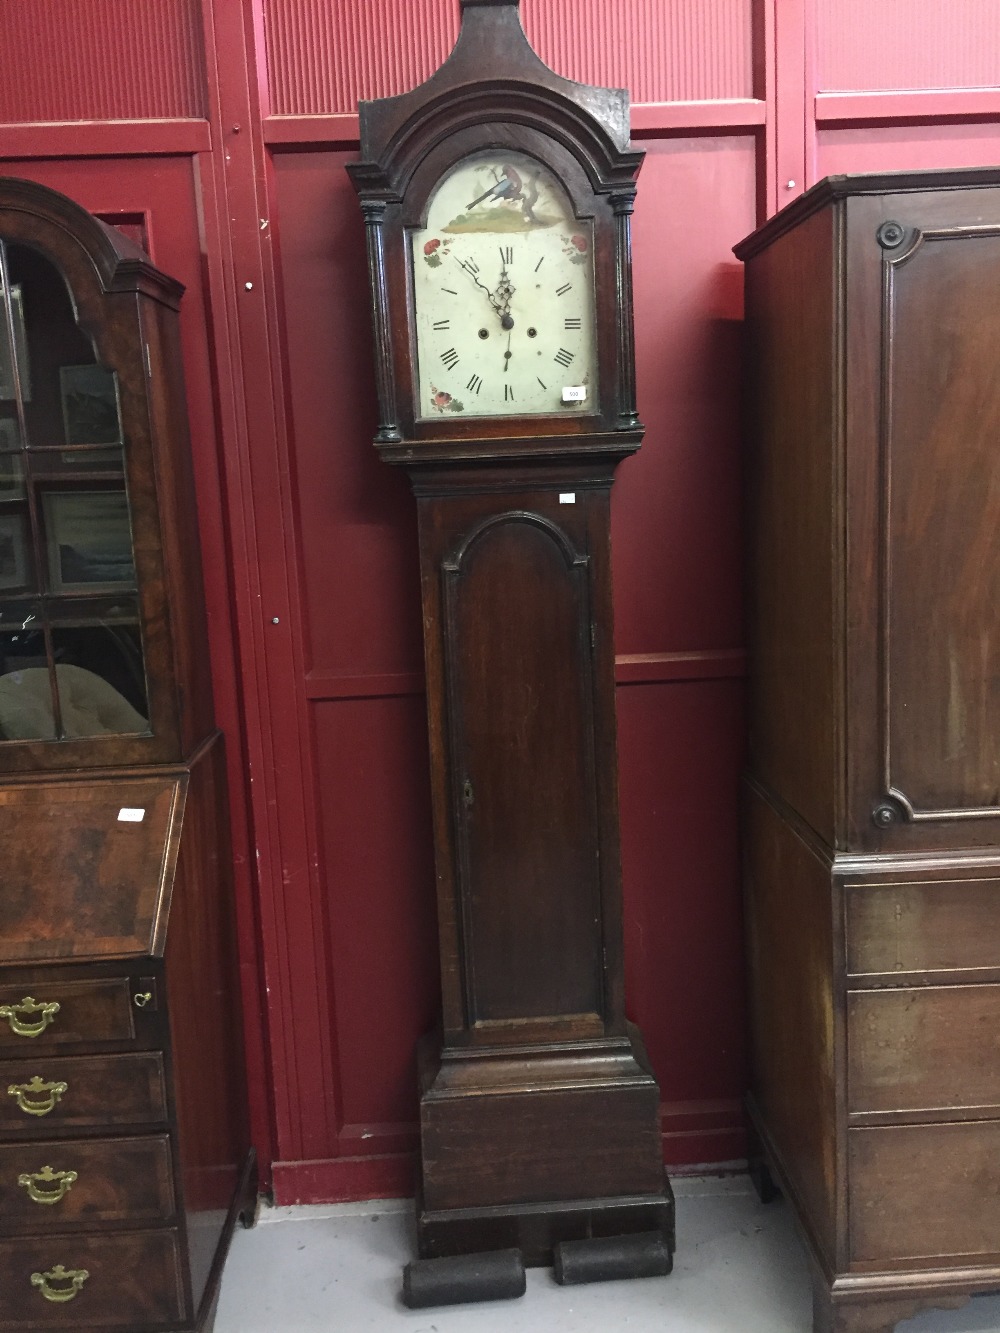 Clocks: 19th cent Mahogany long case 8 day clock. Painted arch dial, Roman numerals. Seconds hand at - Image 2 of 2